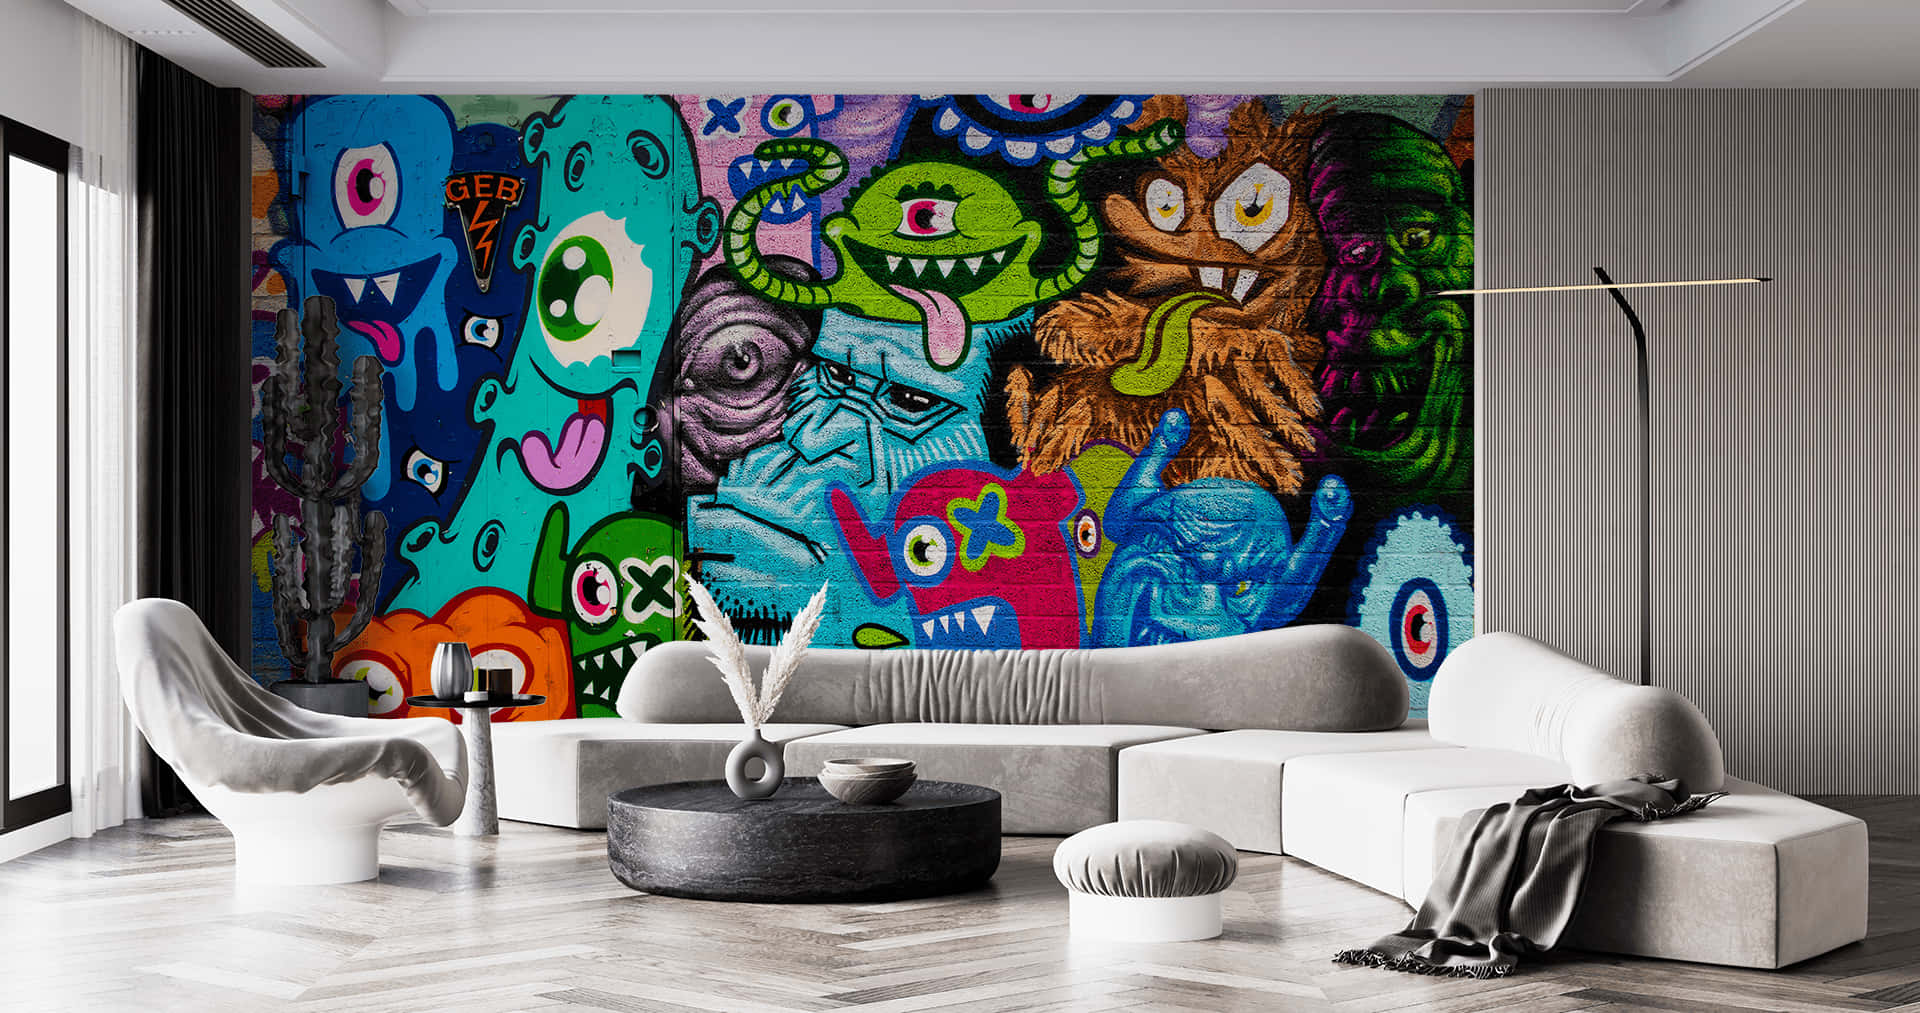 A vibrant and colorful hip hop graffiti mural brightening up the street. Wallpaper